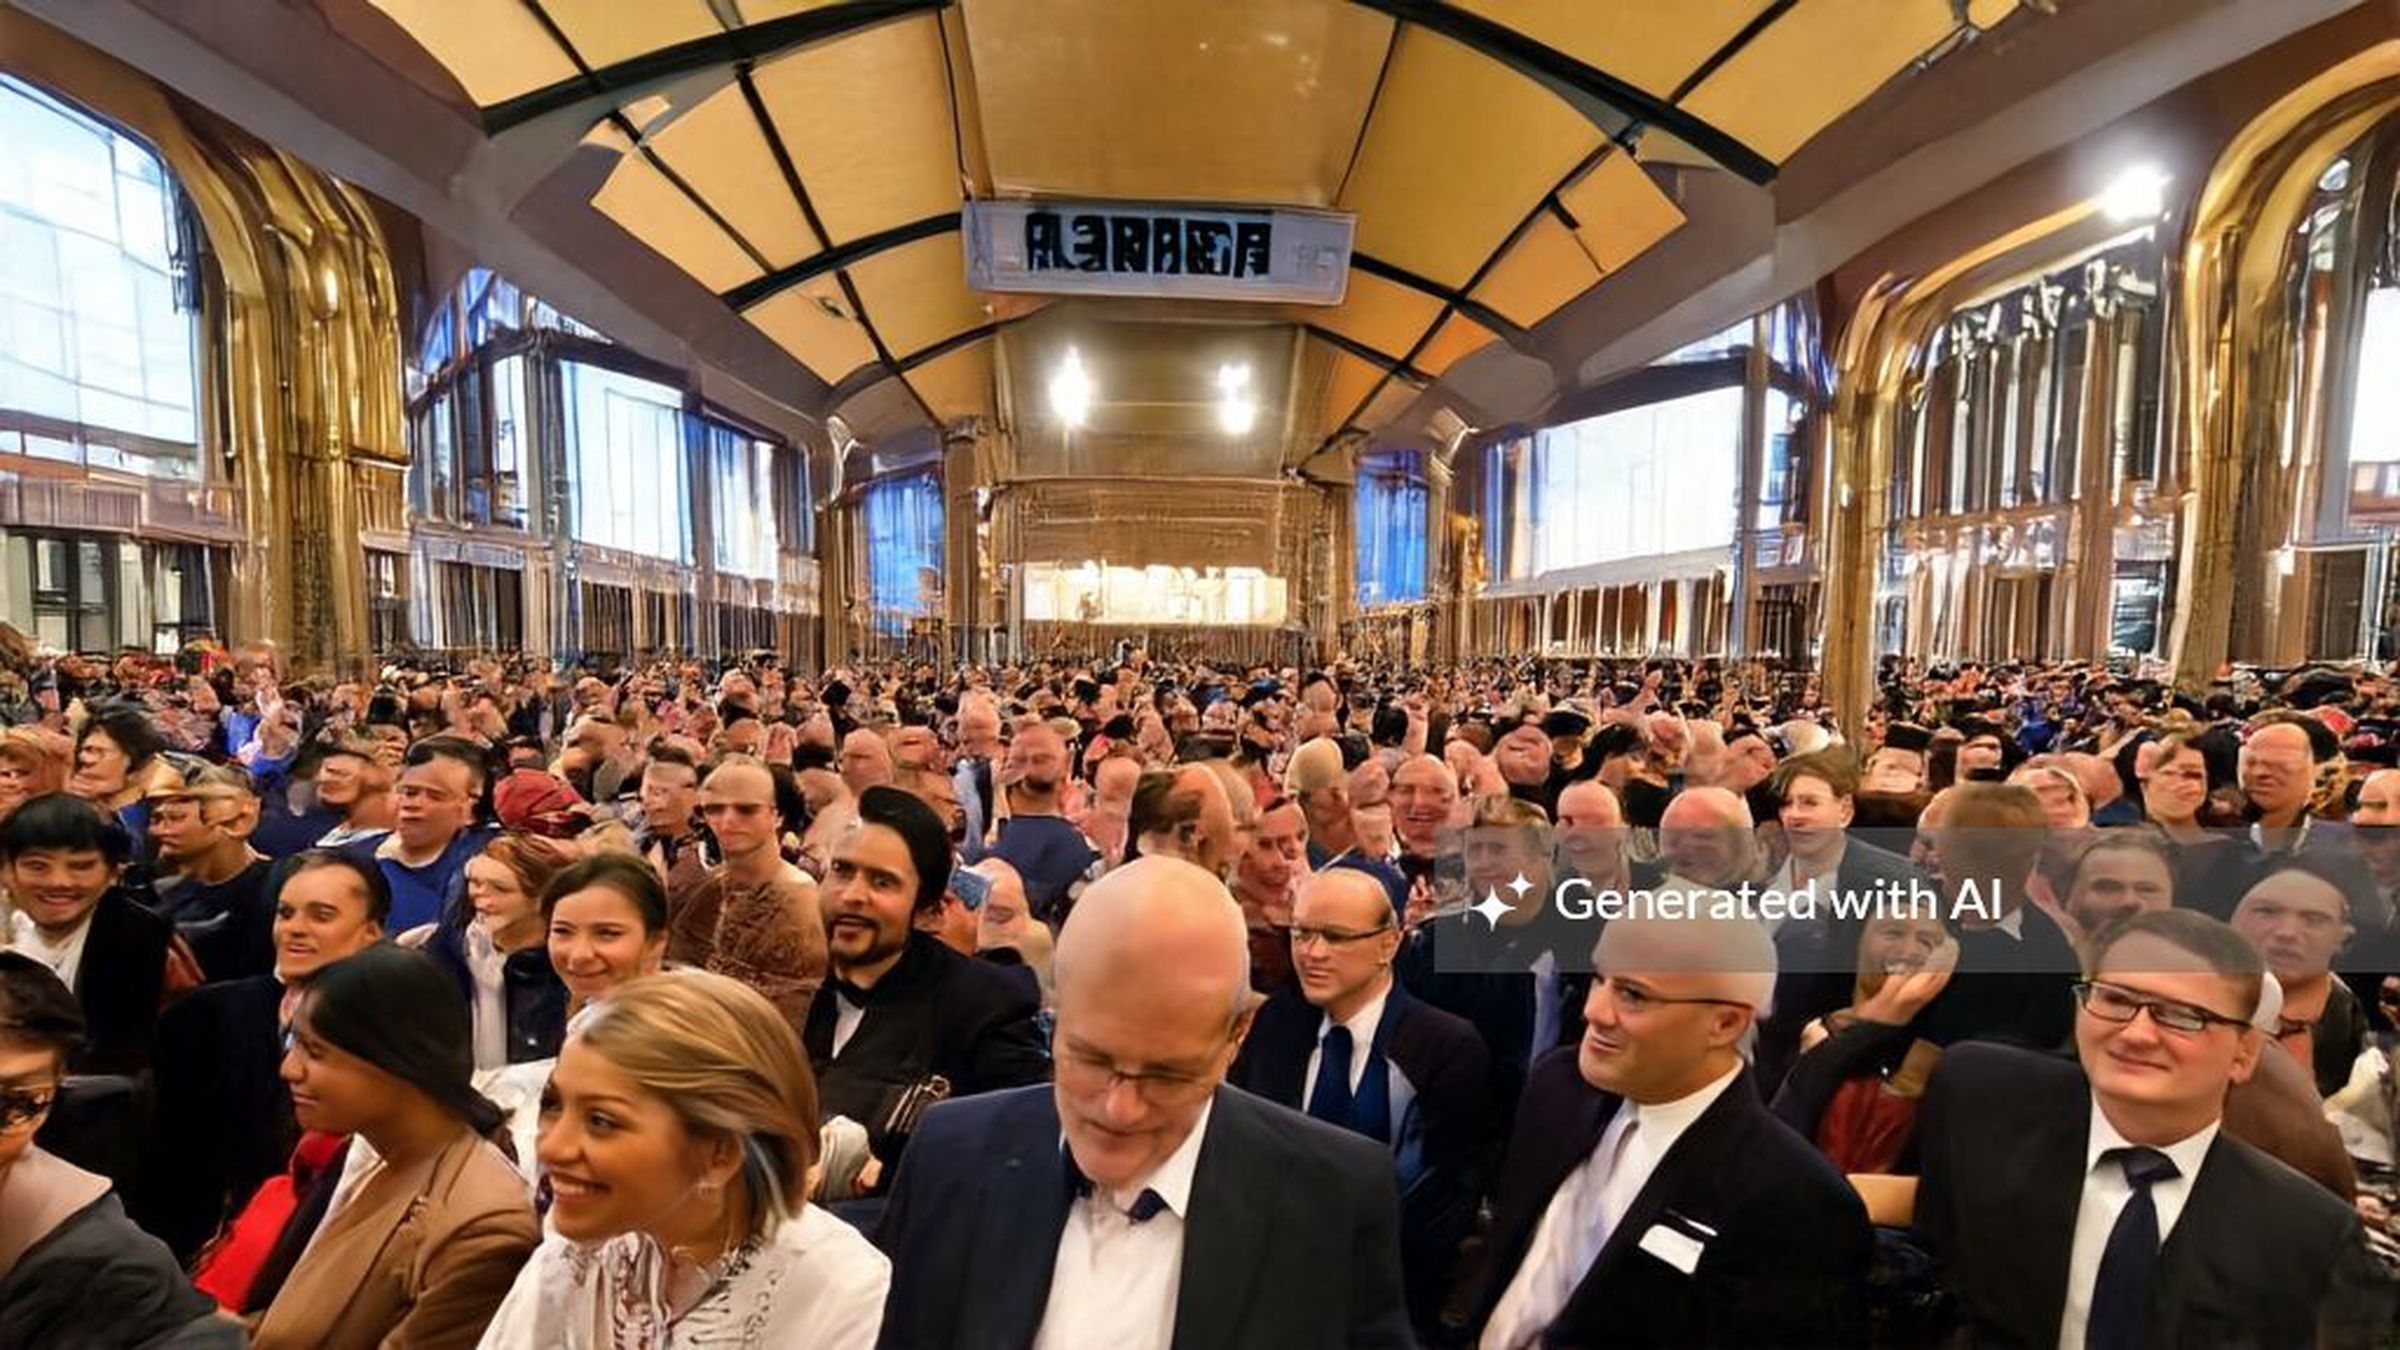 AI-generated image of a large crowd of well-dressed people sitting in a space looking more or less like a hotel ballroom.